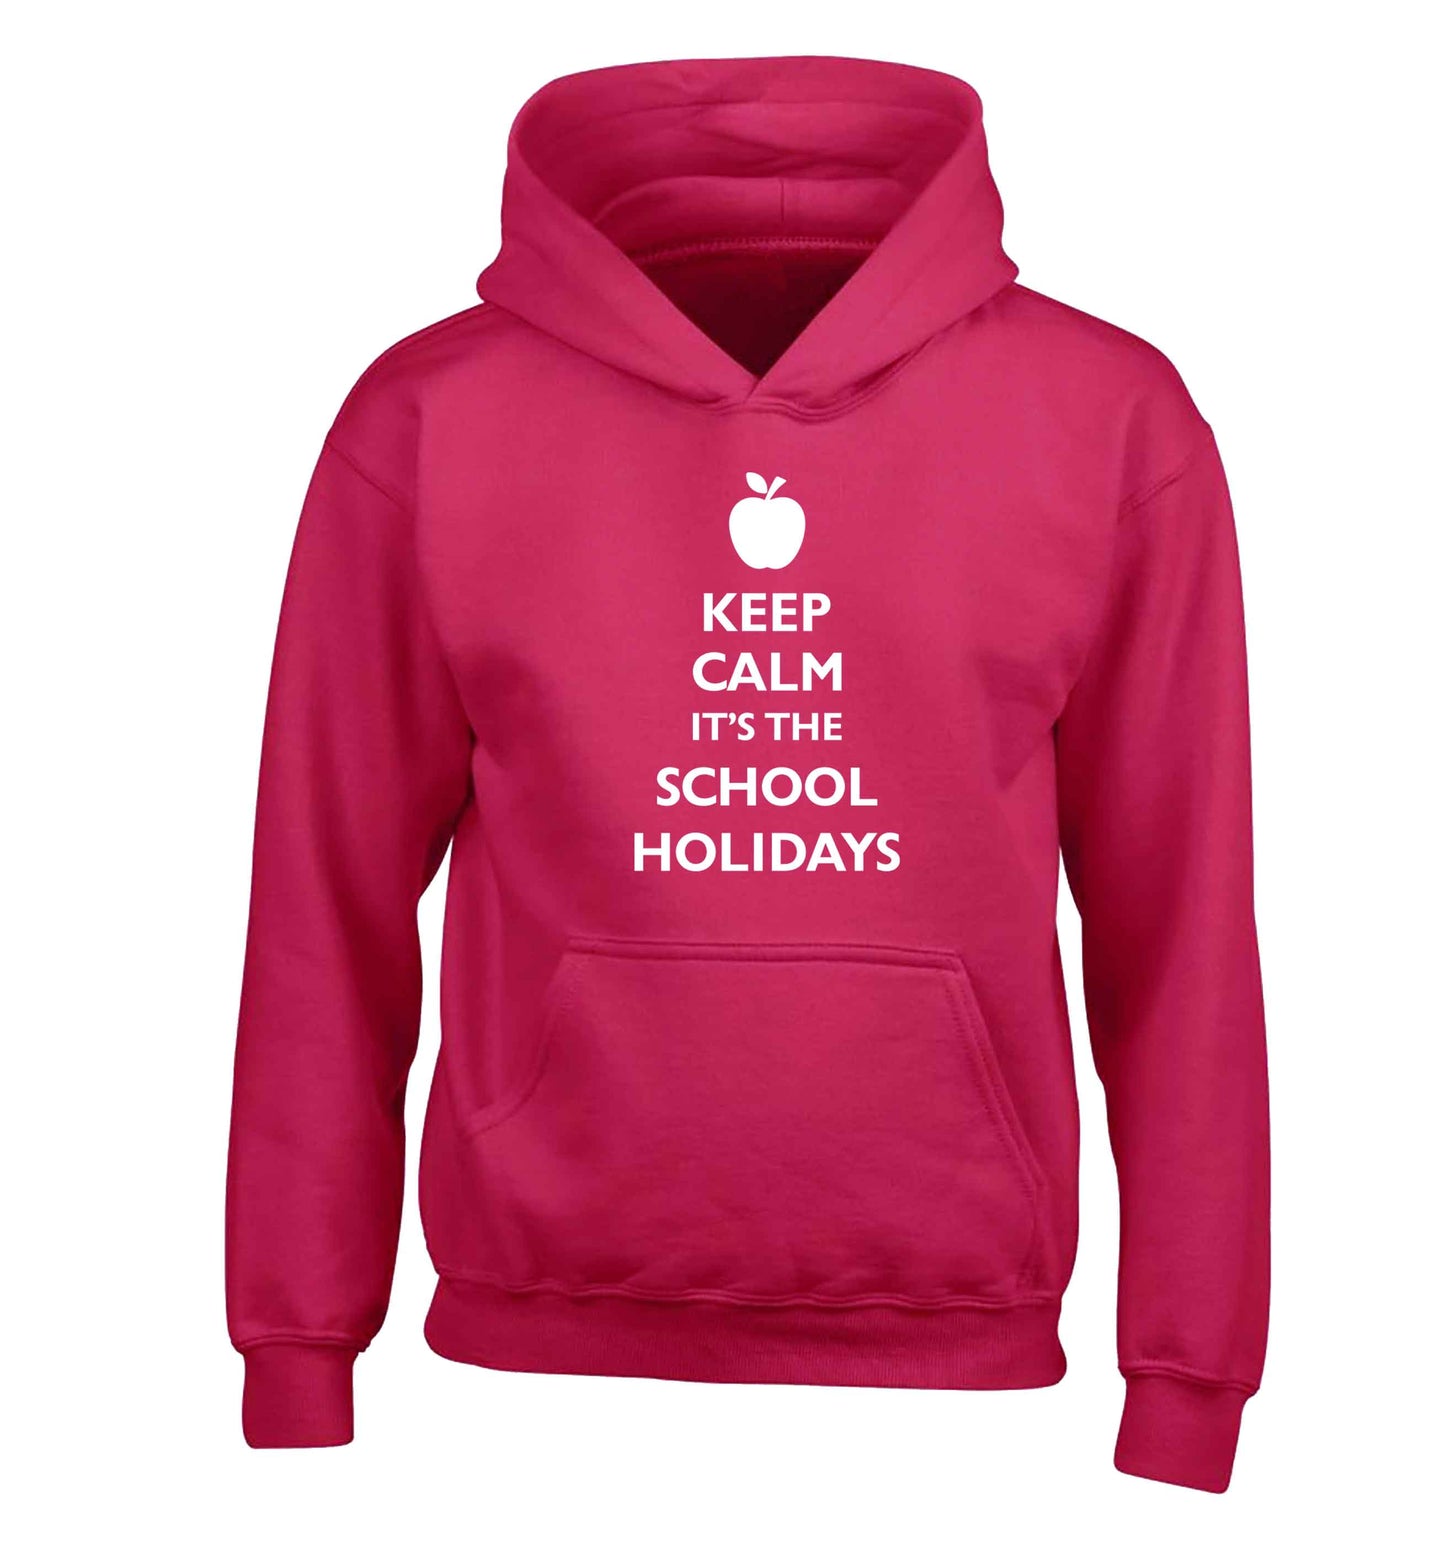 Keep calm it's the school holidays children's pink hoodie 12-13 Years